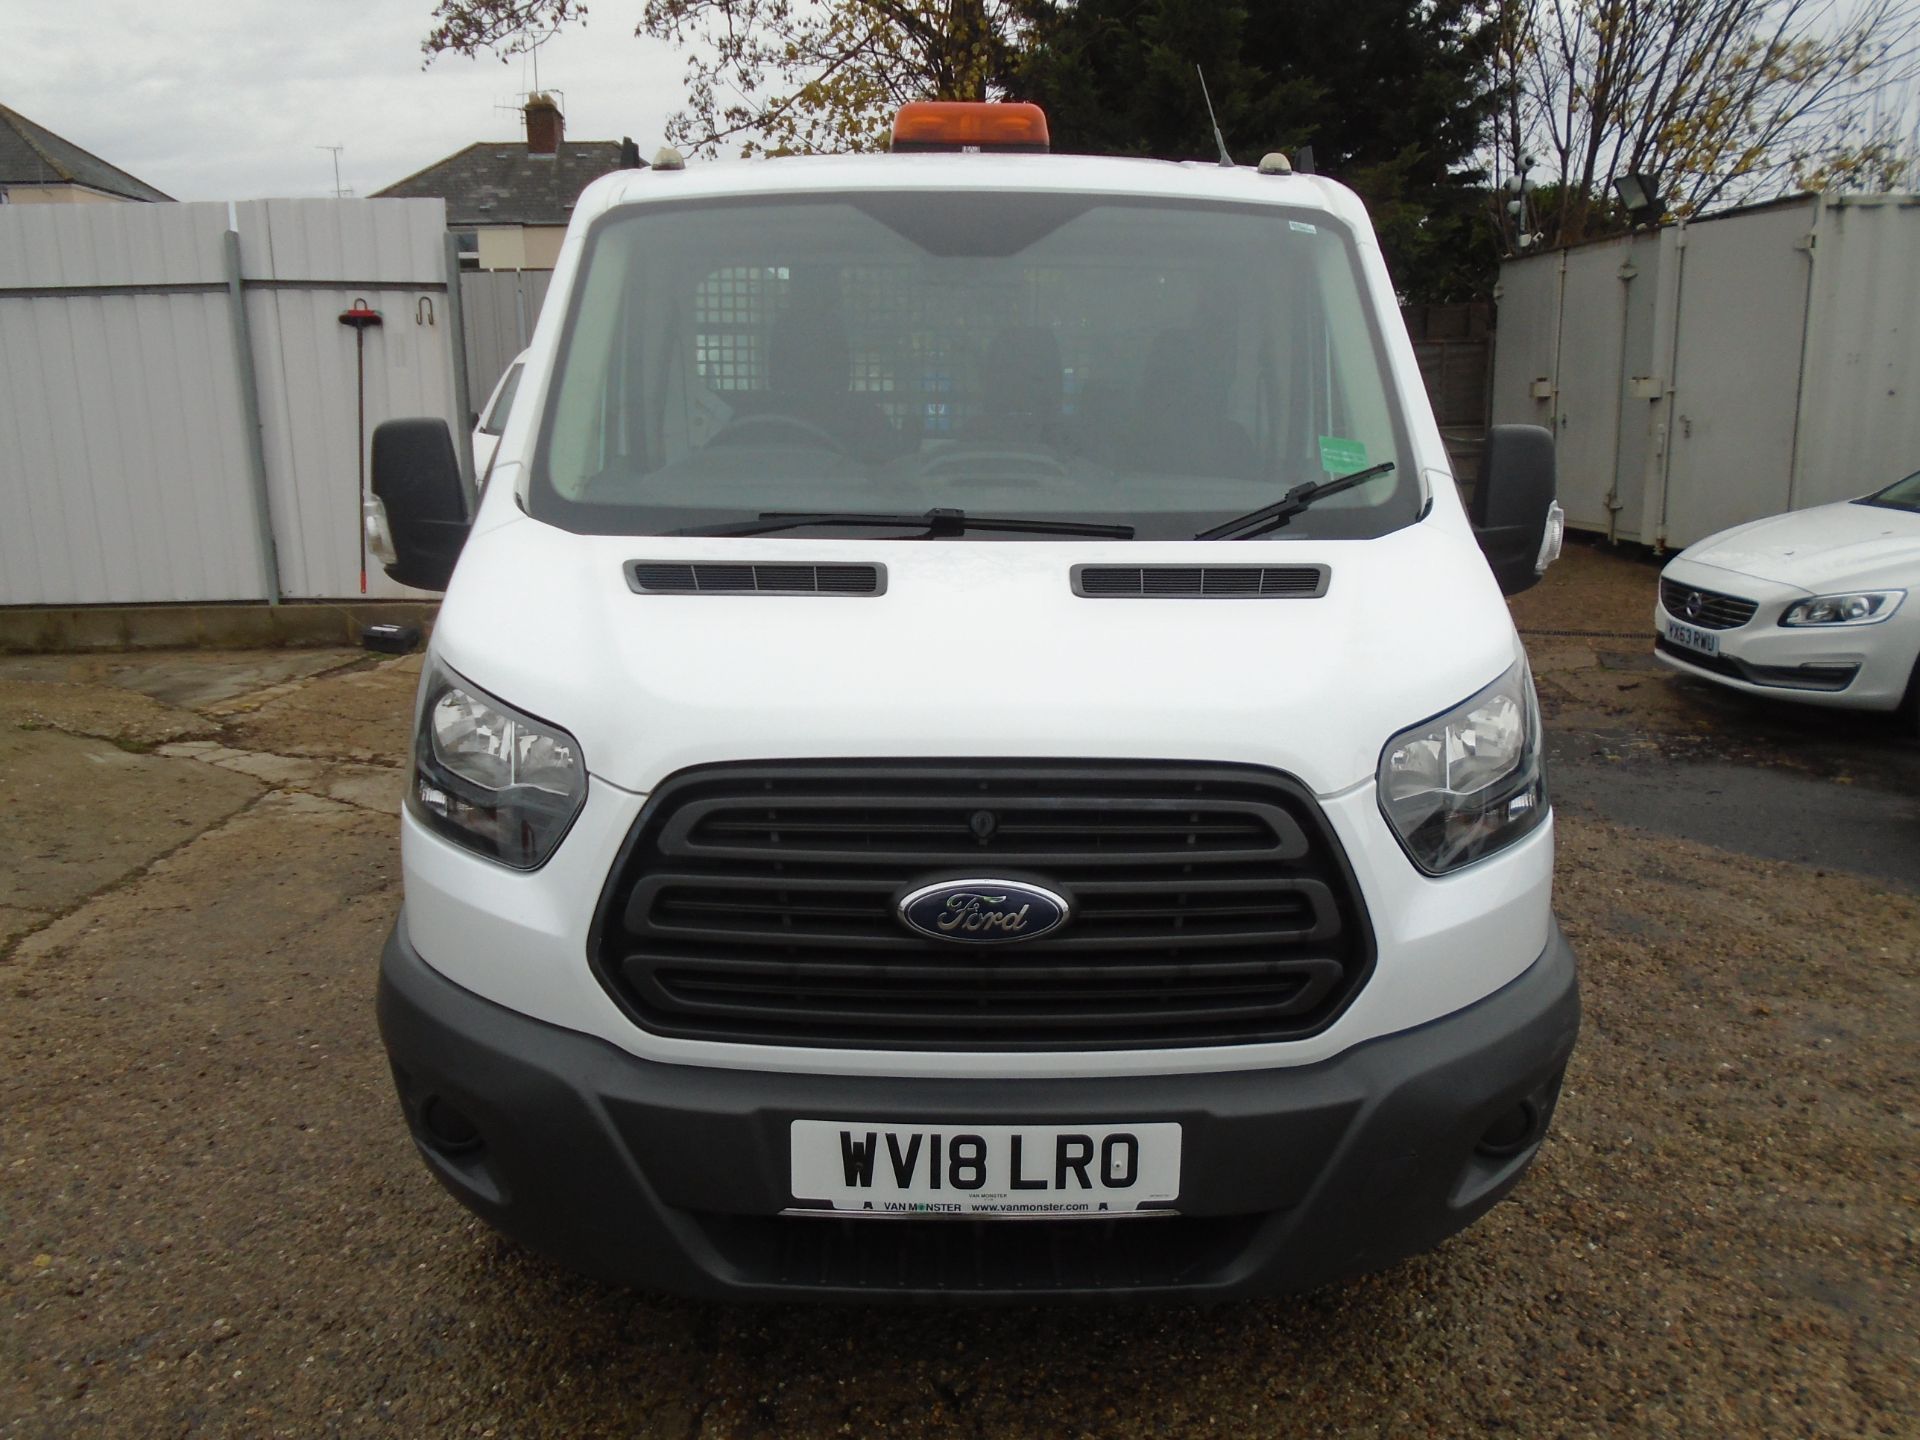 2018 Ford Transit 2.0 Tdci 130Ps One Stop Tipper [1 Way] (WV18LRO) Image 2